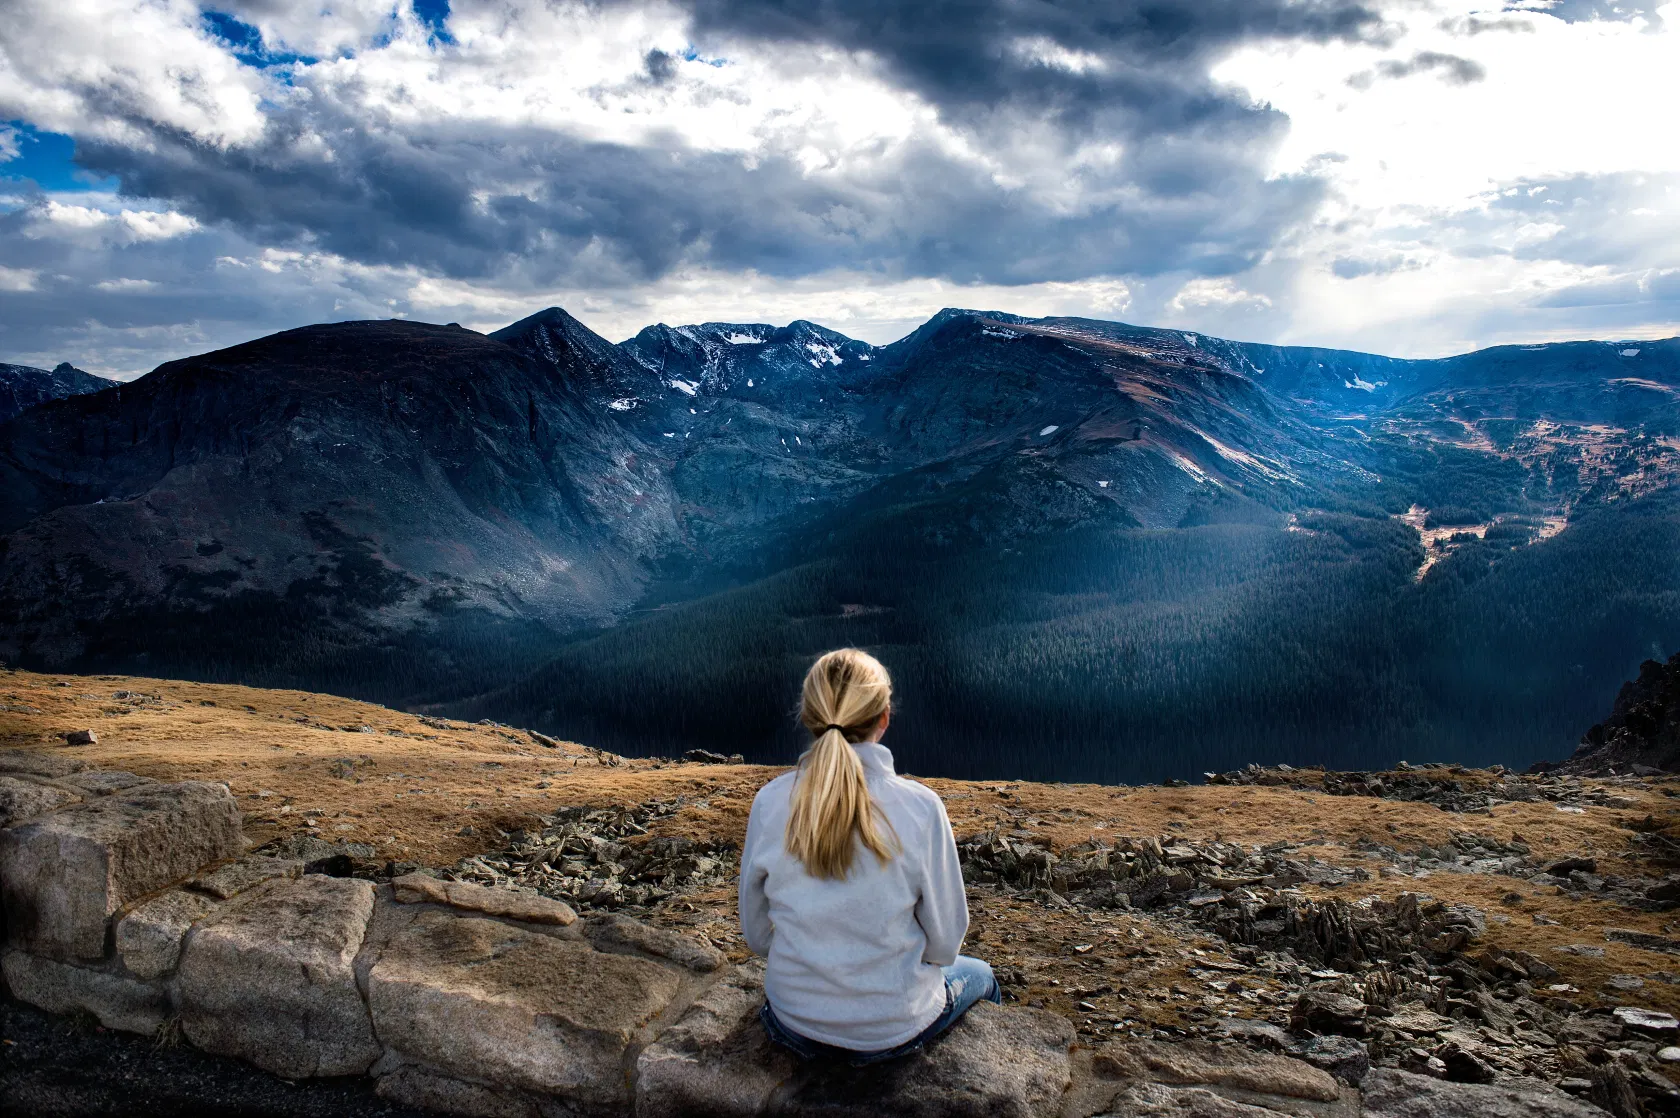 Woman sitting on the mountain, overcast sky with mountain view